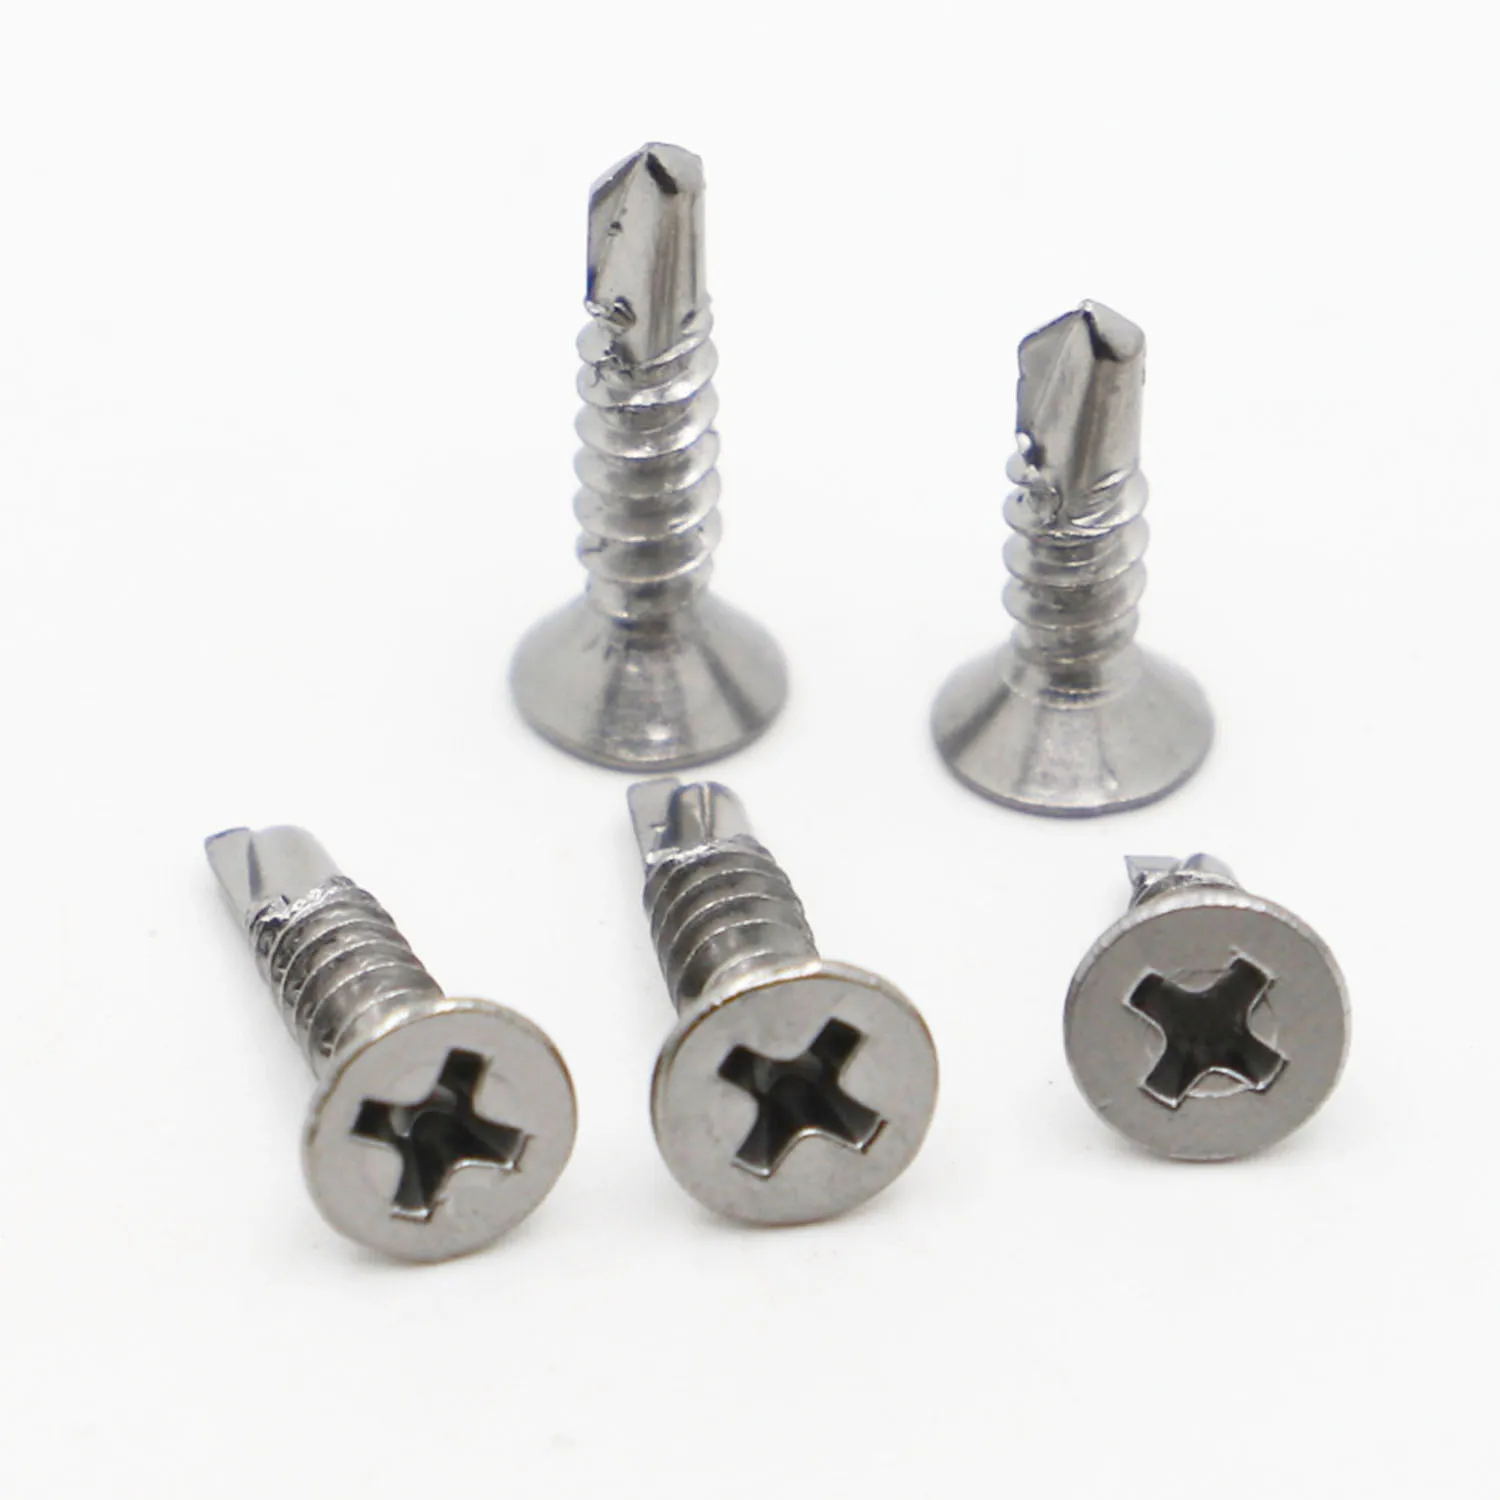 

410 Stainless Steel Self Tapping Screw M3.5 M4.2 M4.8 M5.5 M6.3 Flat Head Phillips Self Drilling Screw